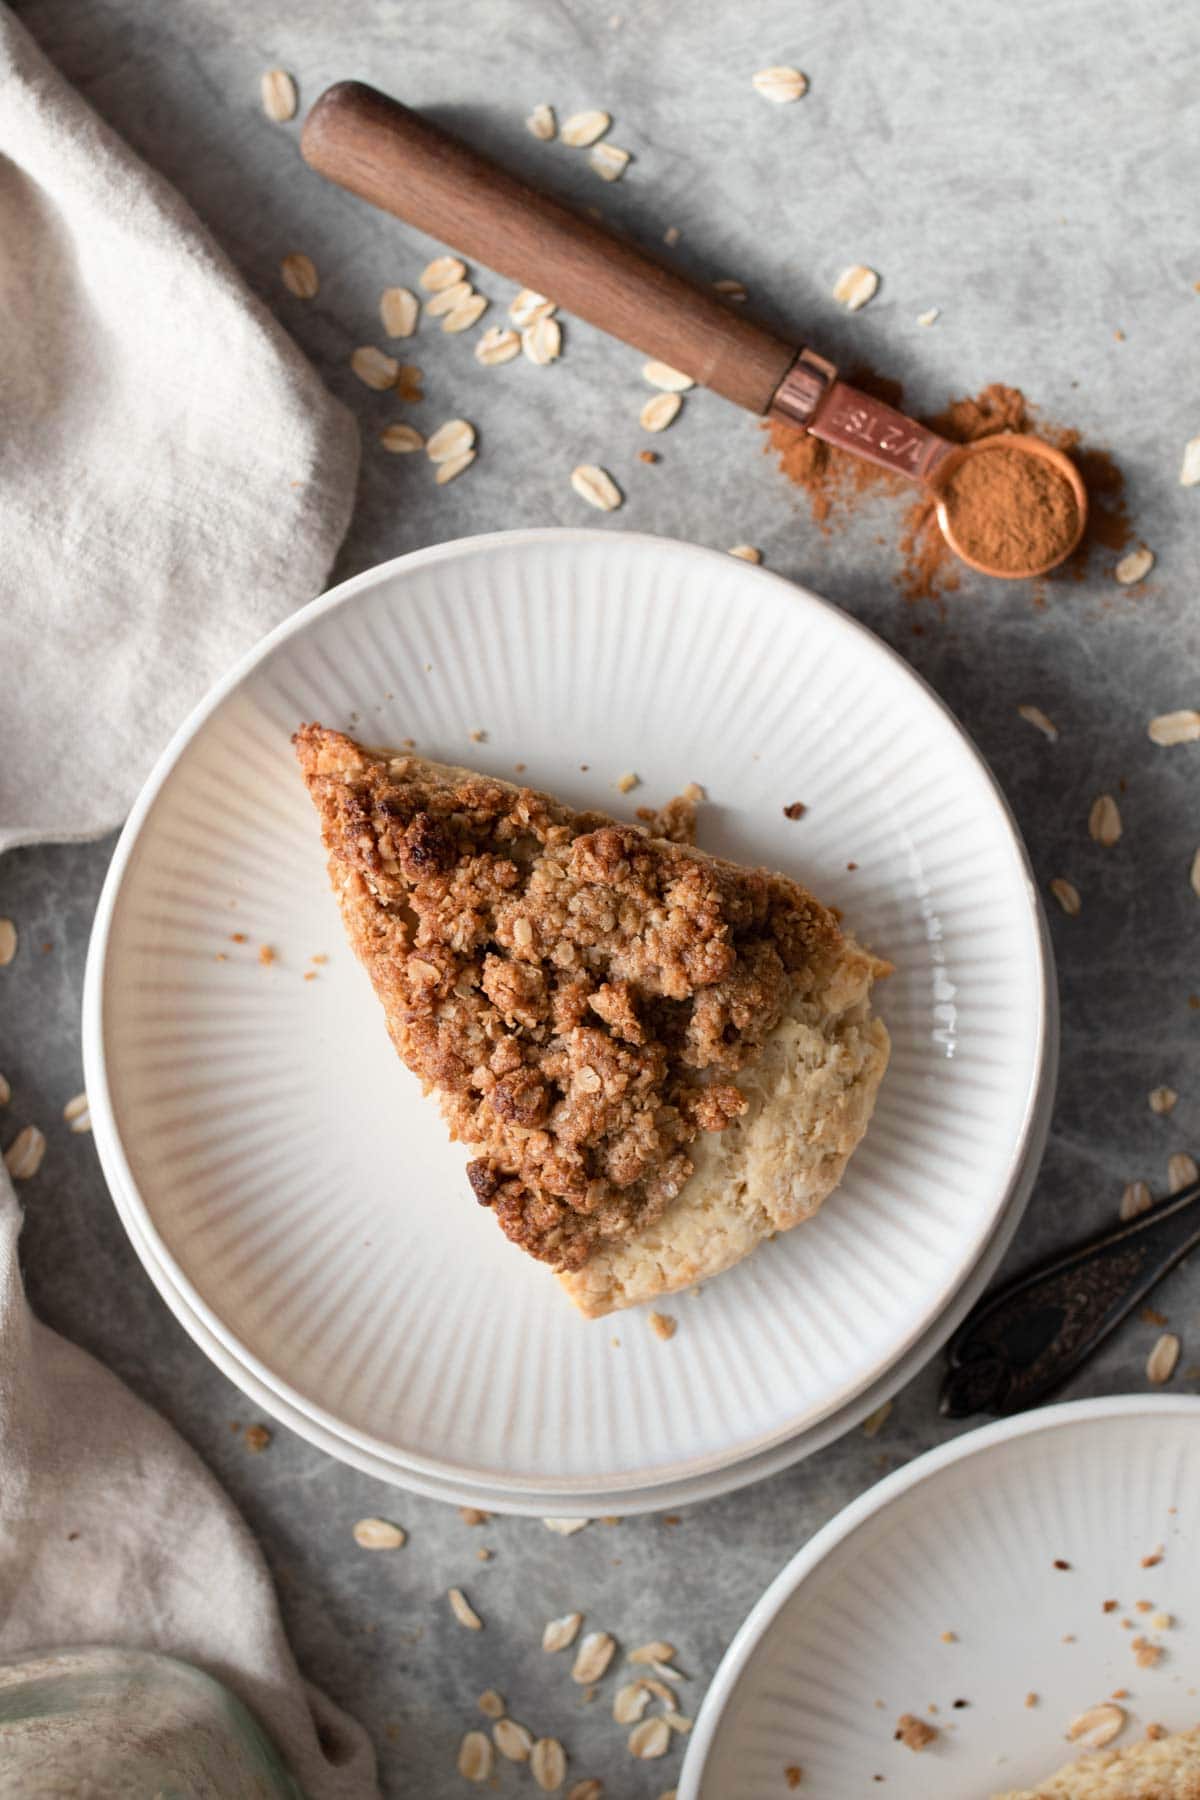 Scones topped with a cinnamon oat crumble.